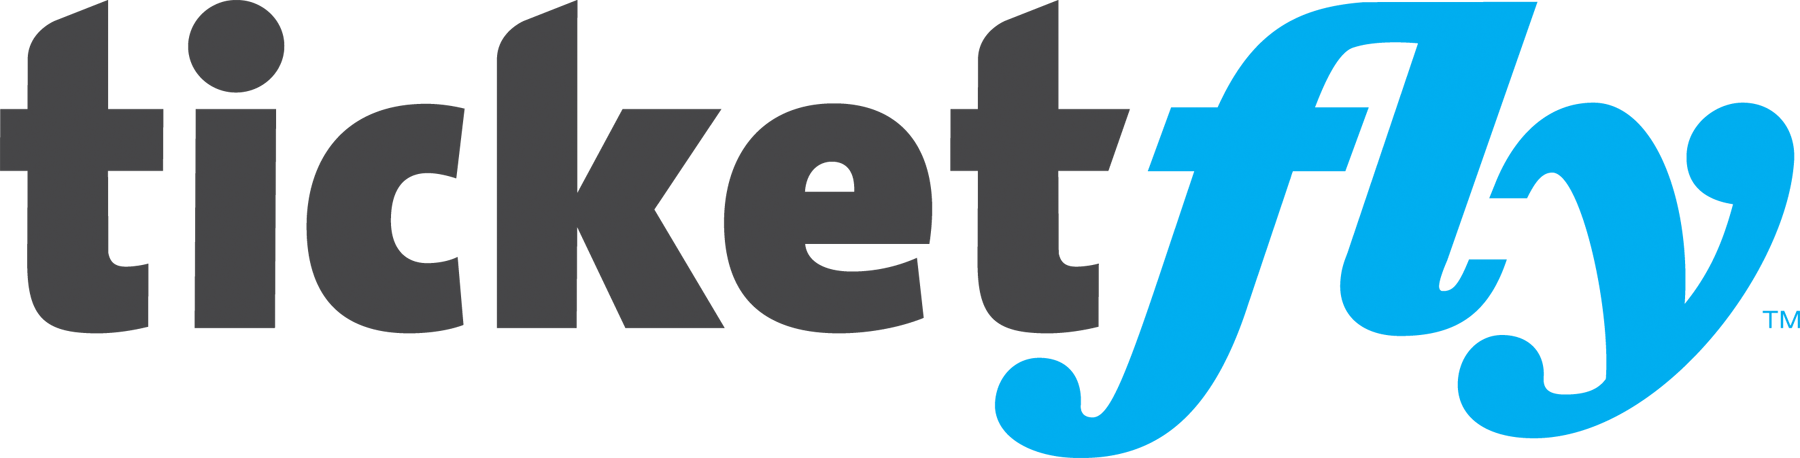 ticketfly_logo_positive.png